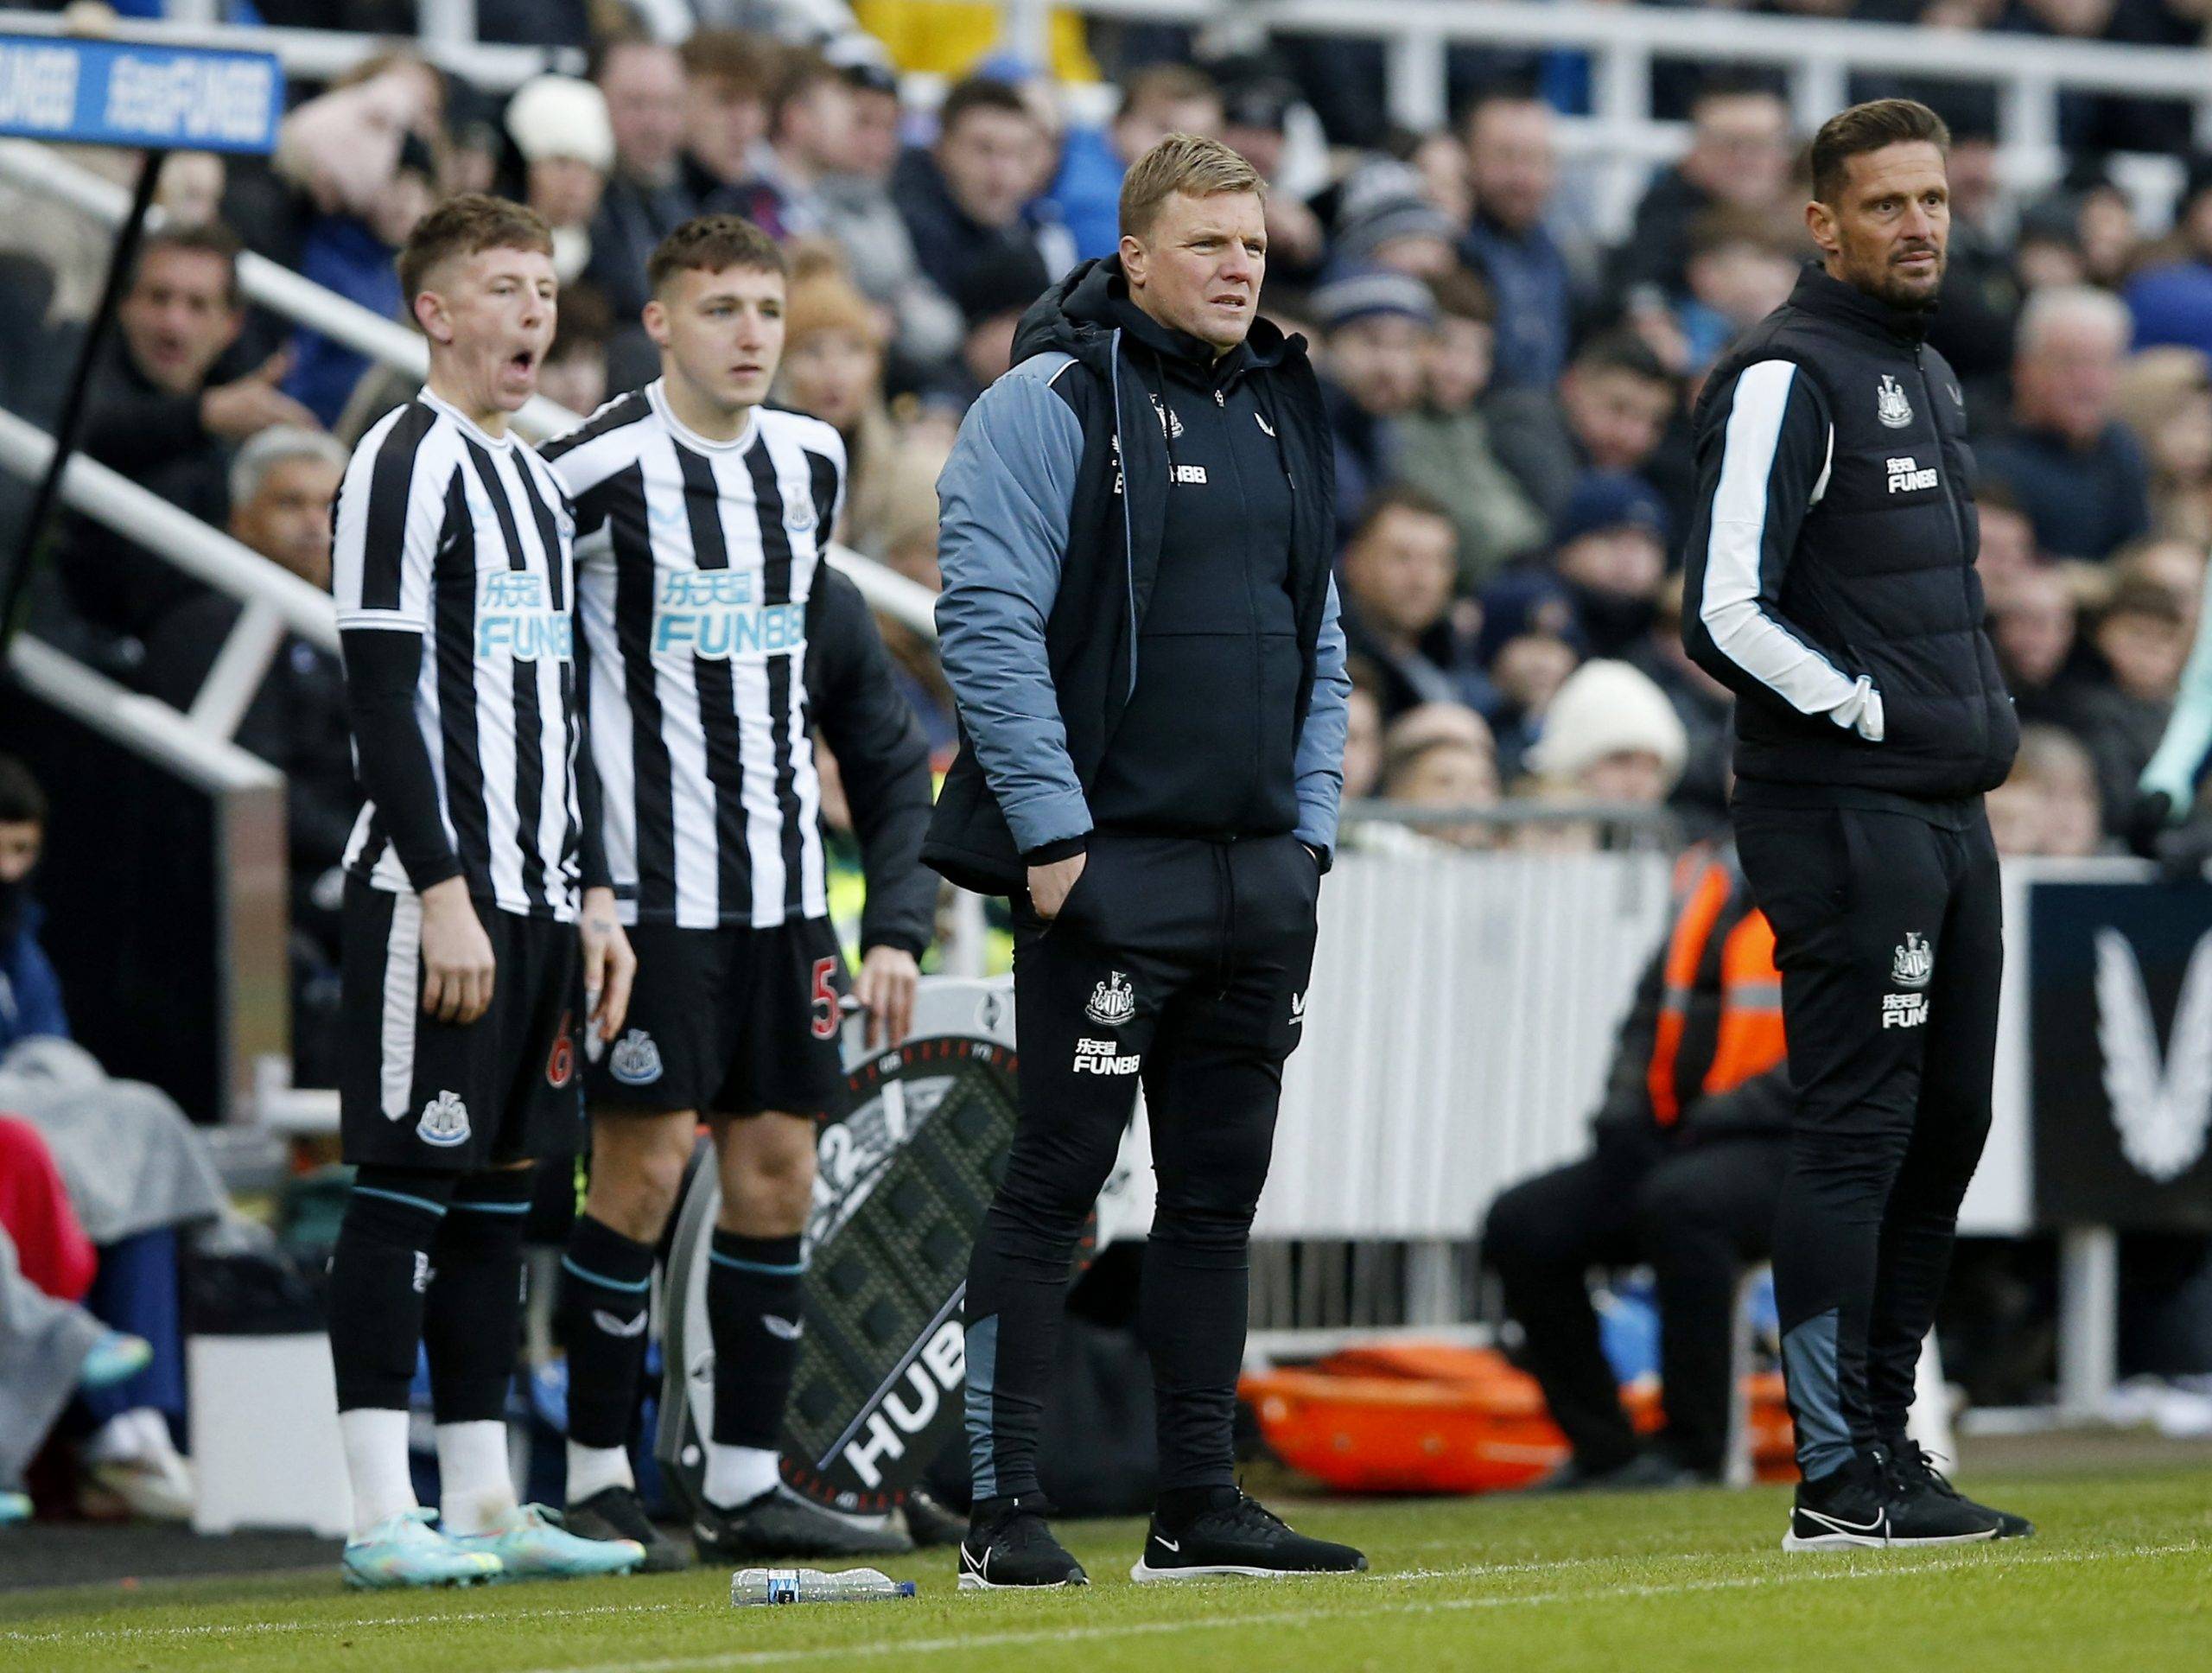 Newcastle could be without a few first-team players on Friday - Lee Ryder - Newcastle United News